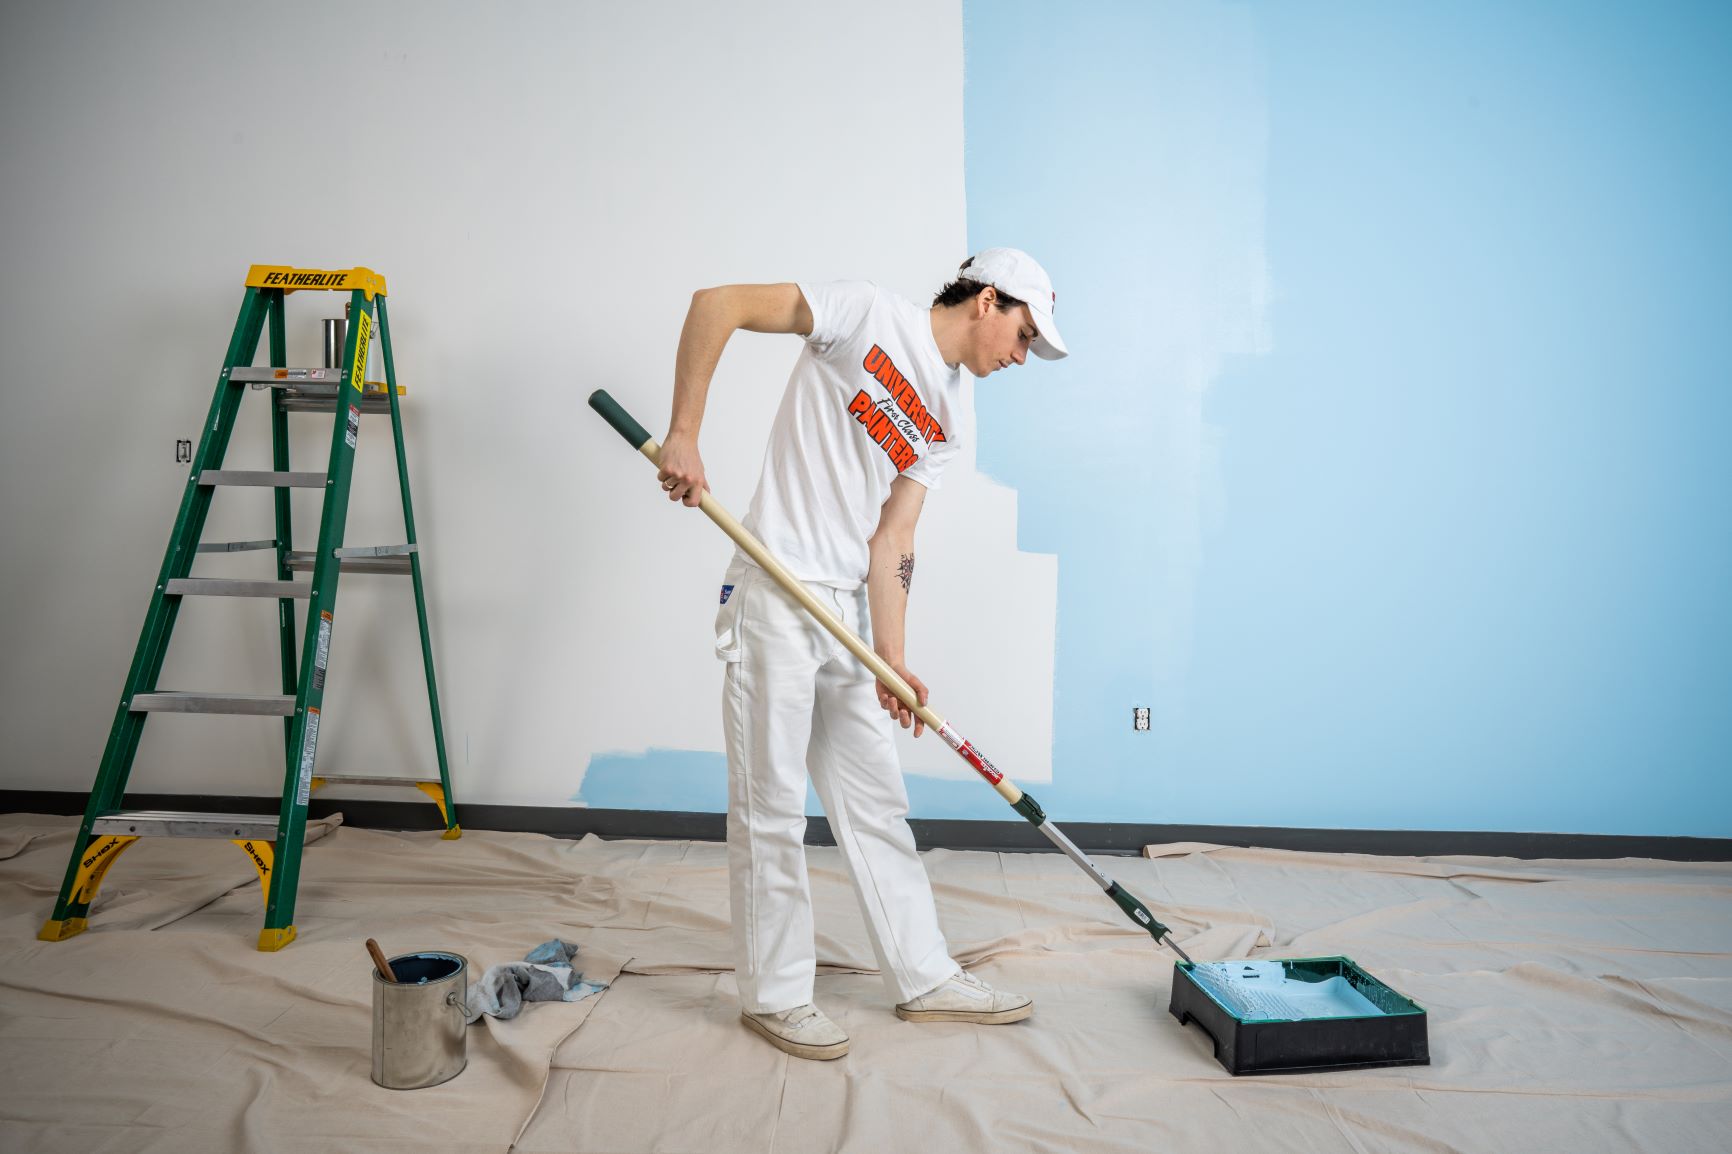 university painters in fraser valley